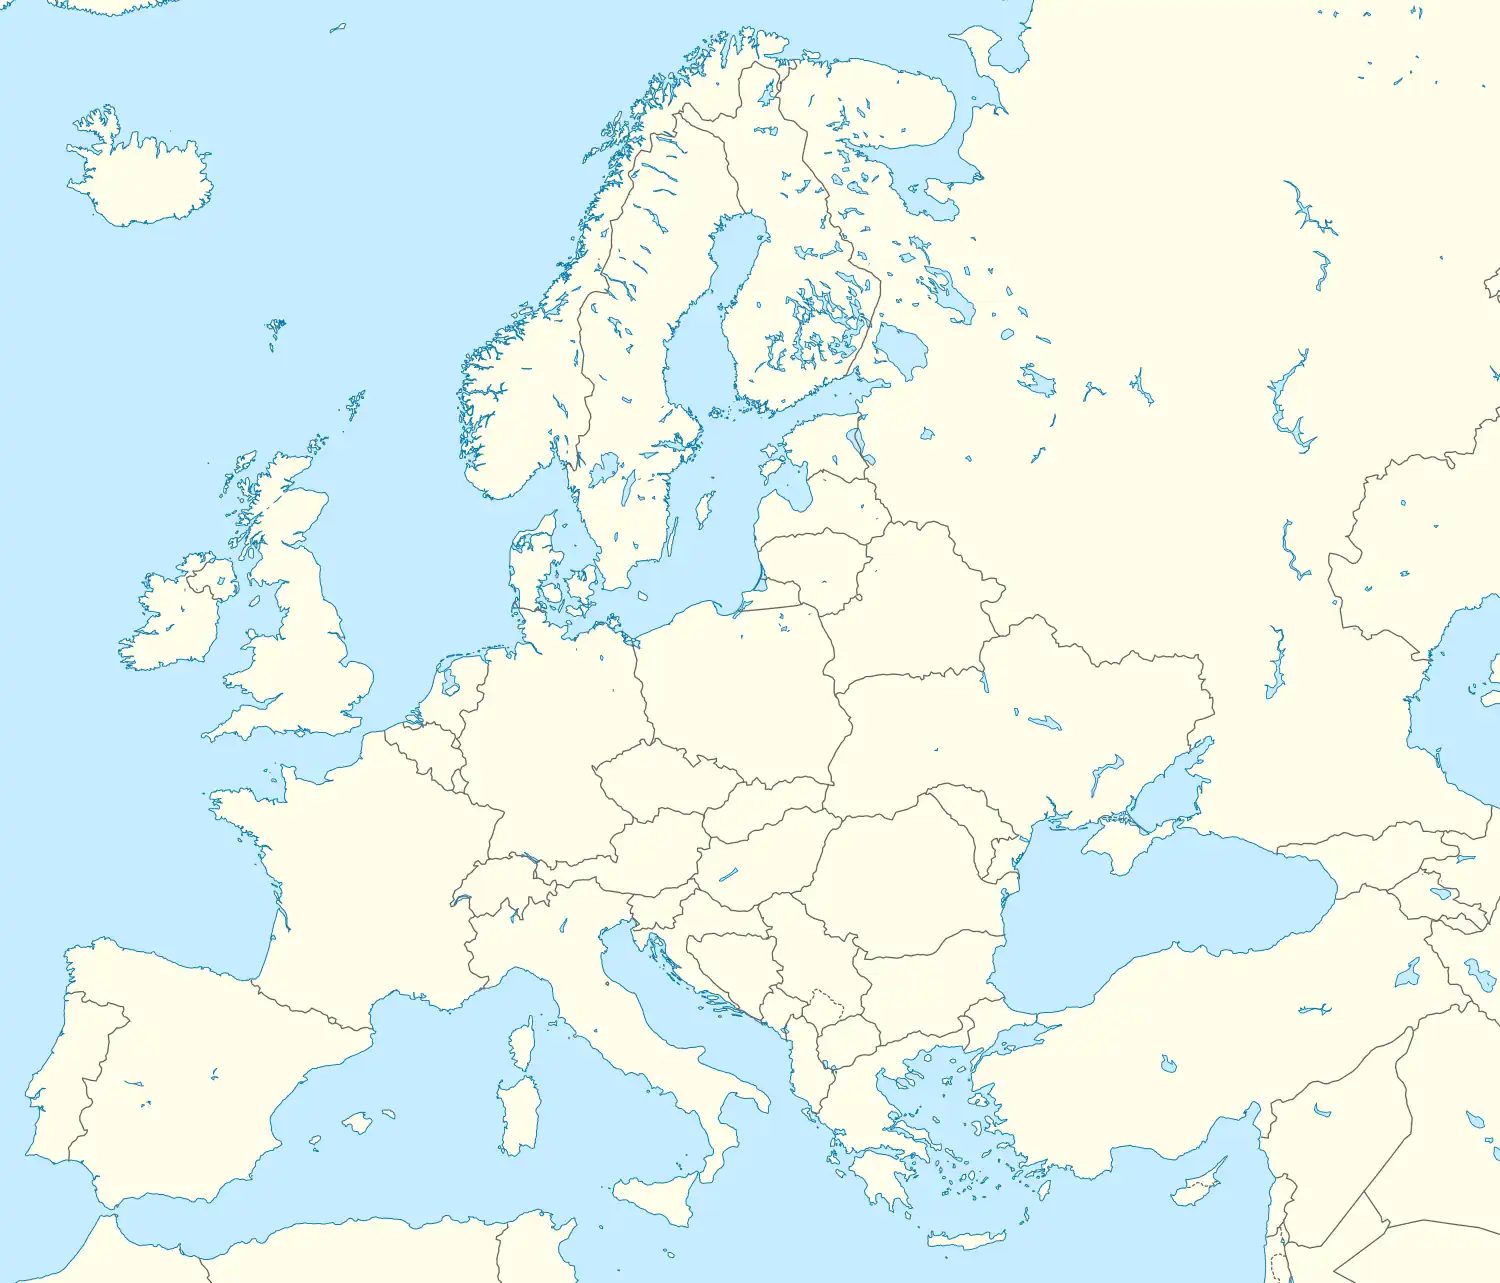 München is located in Europe